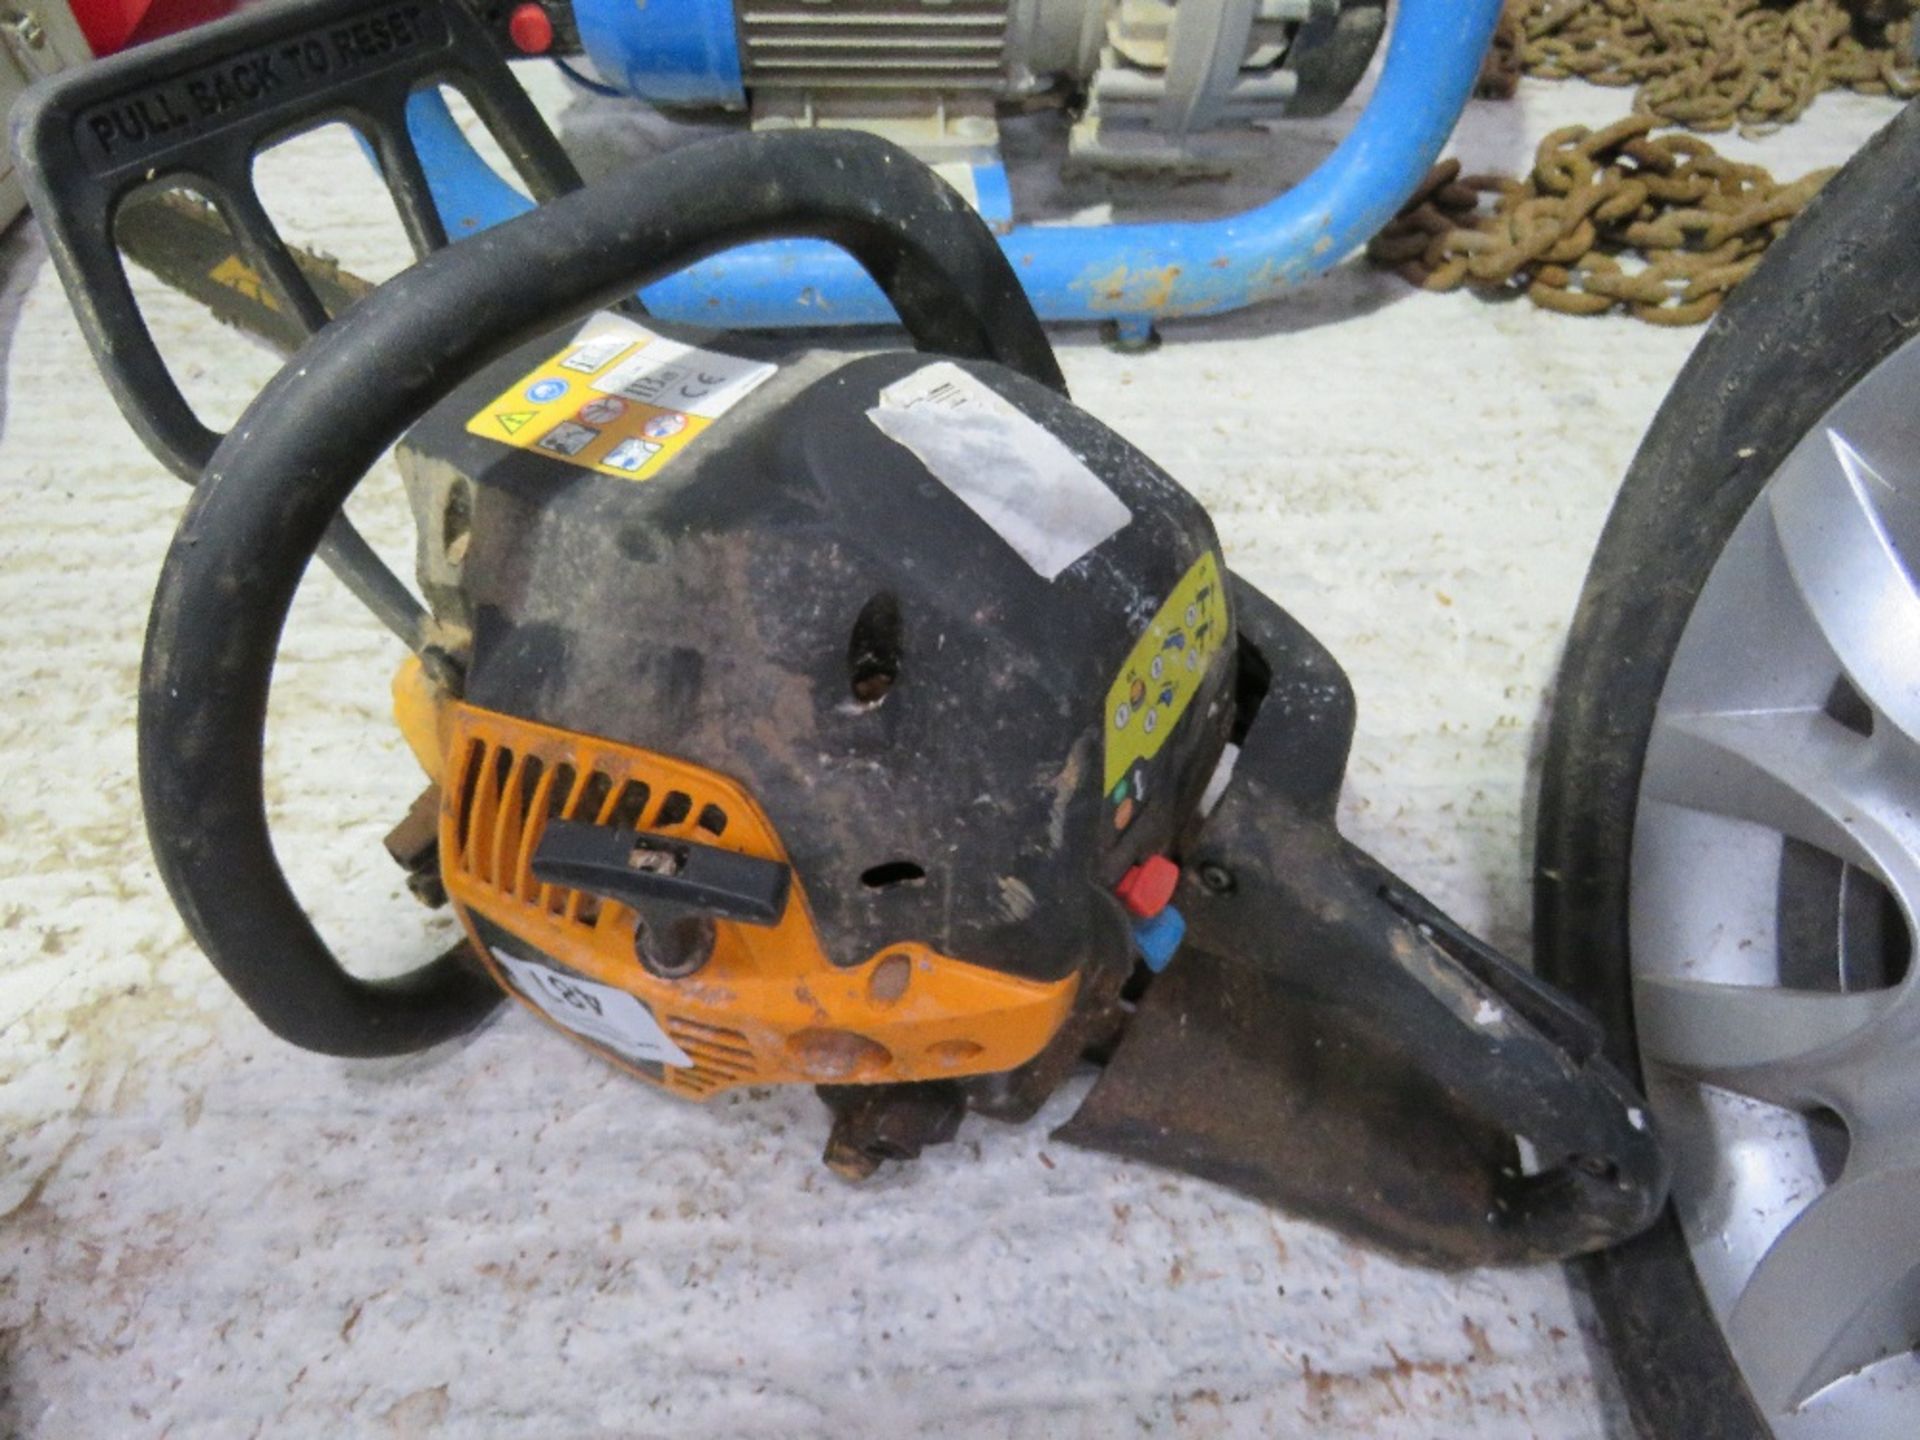 McCULLOCH PETROL ENGINED CHAINSAW. - Image 3 of 3